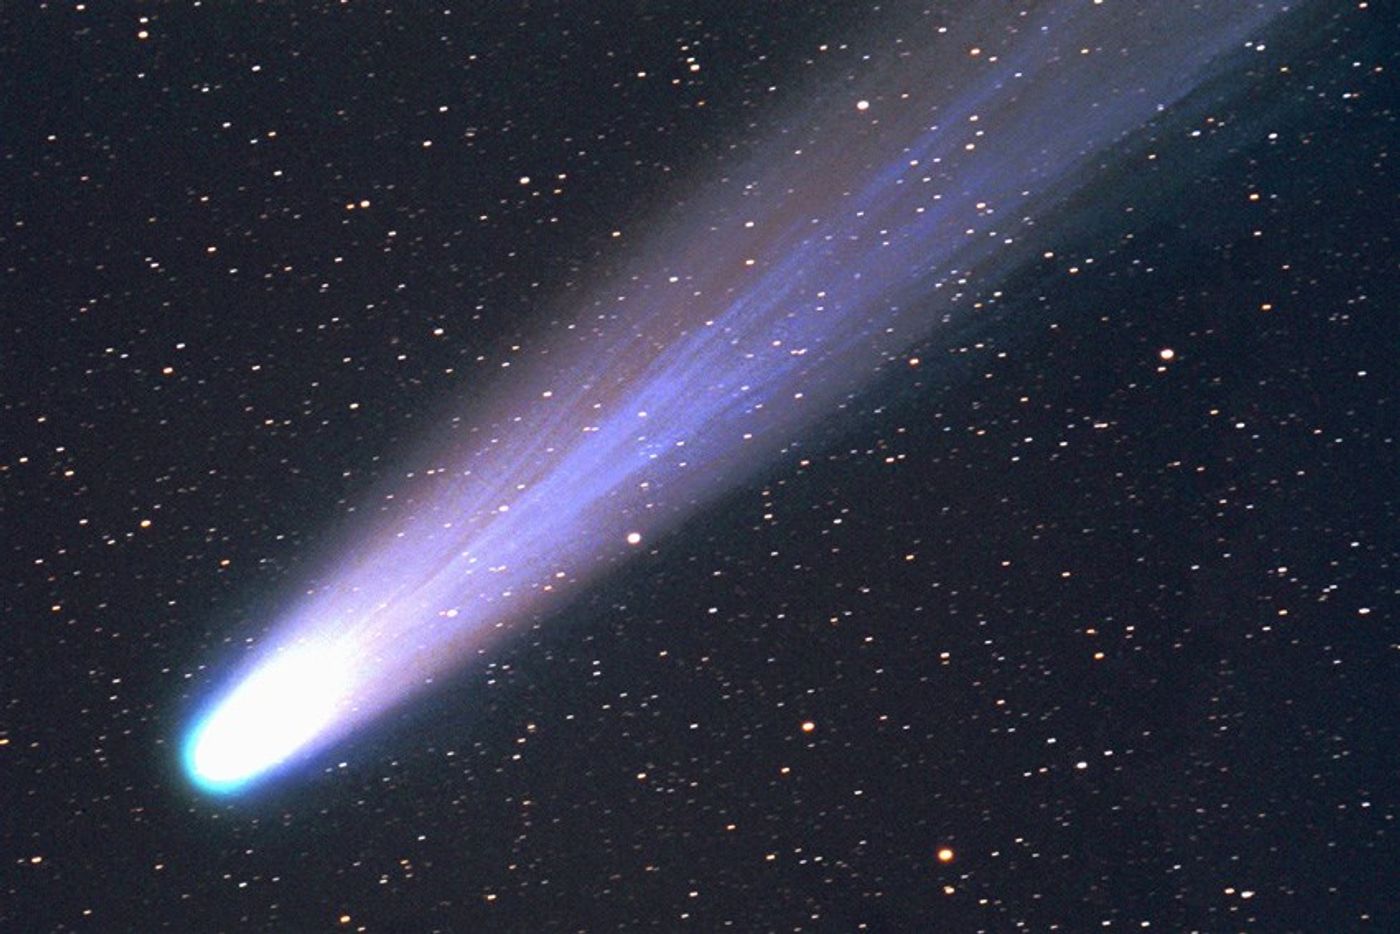 Where did comets actually come from?